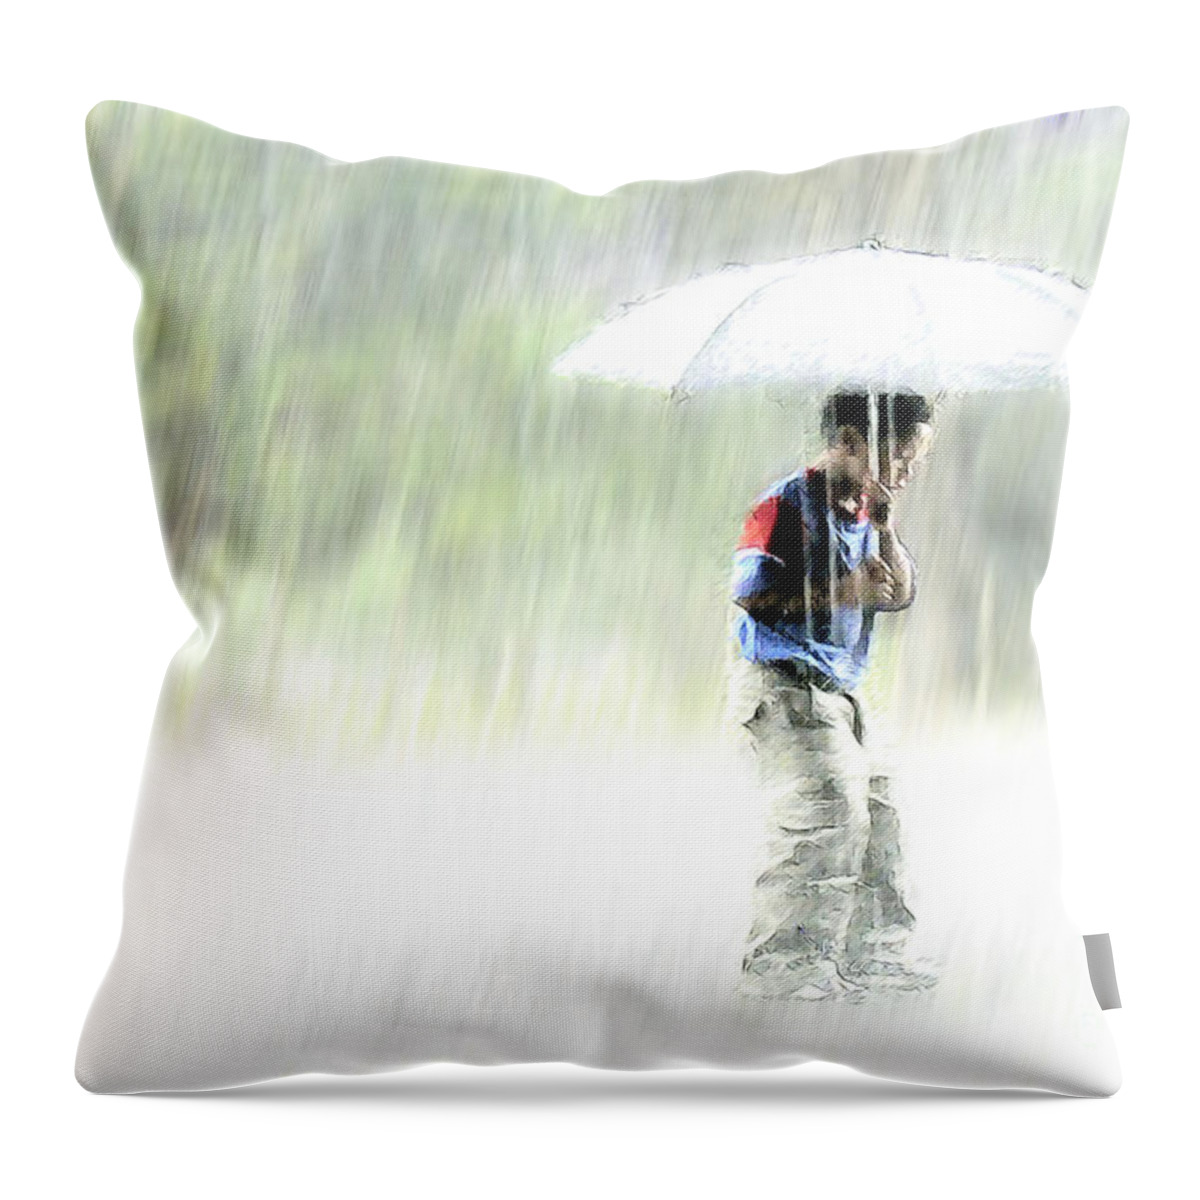 Children Throw Pillow featuring the photograph It's Raining Outside by Heiko Koehrer-Wagner